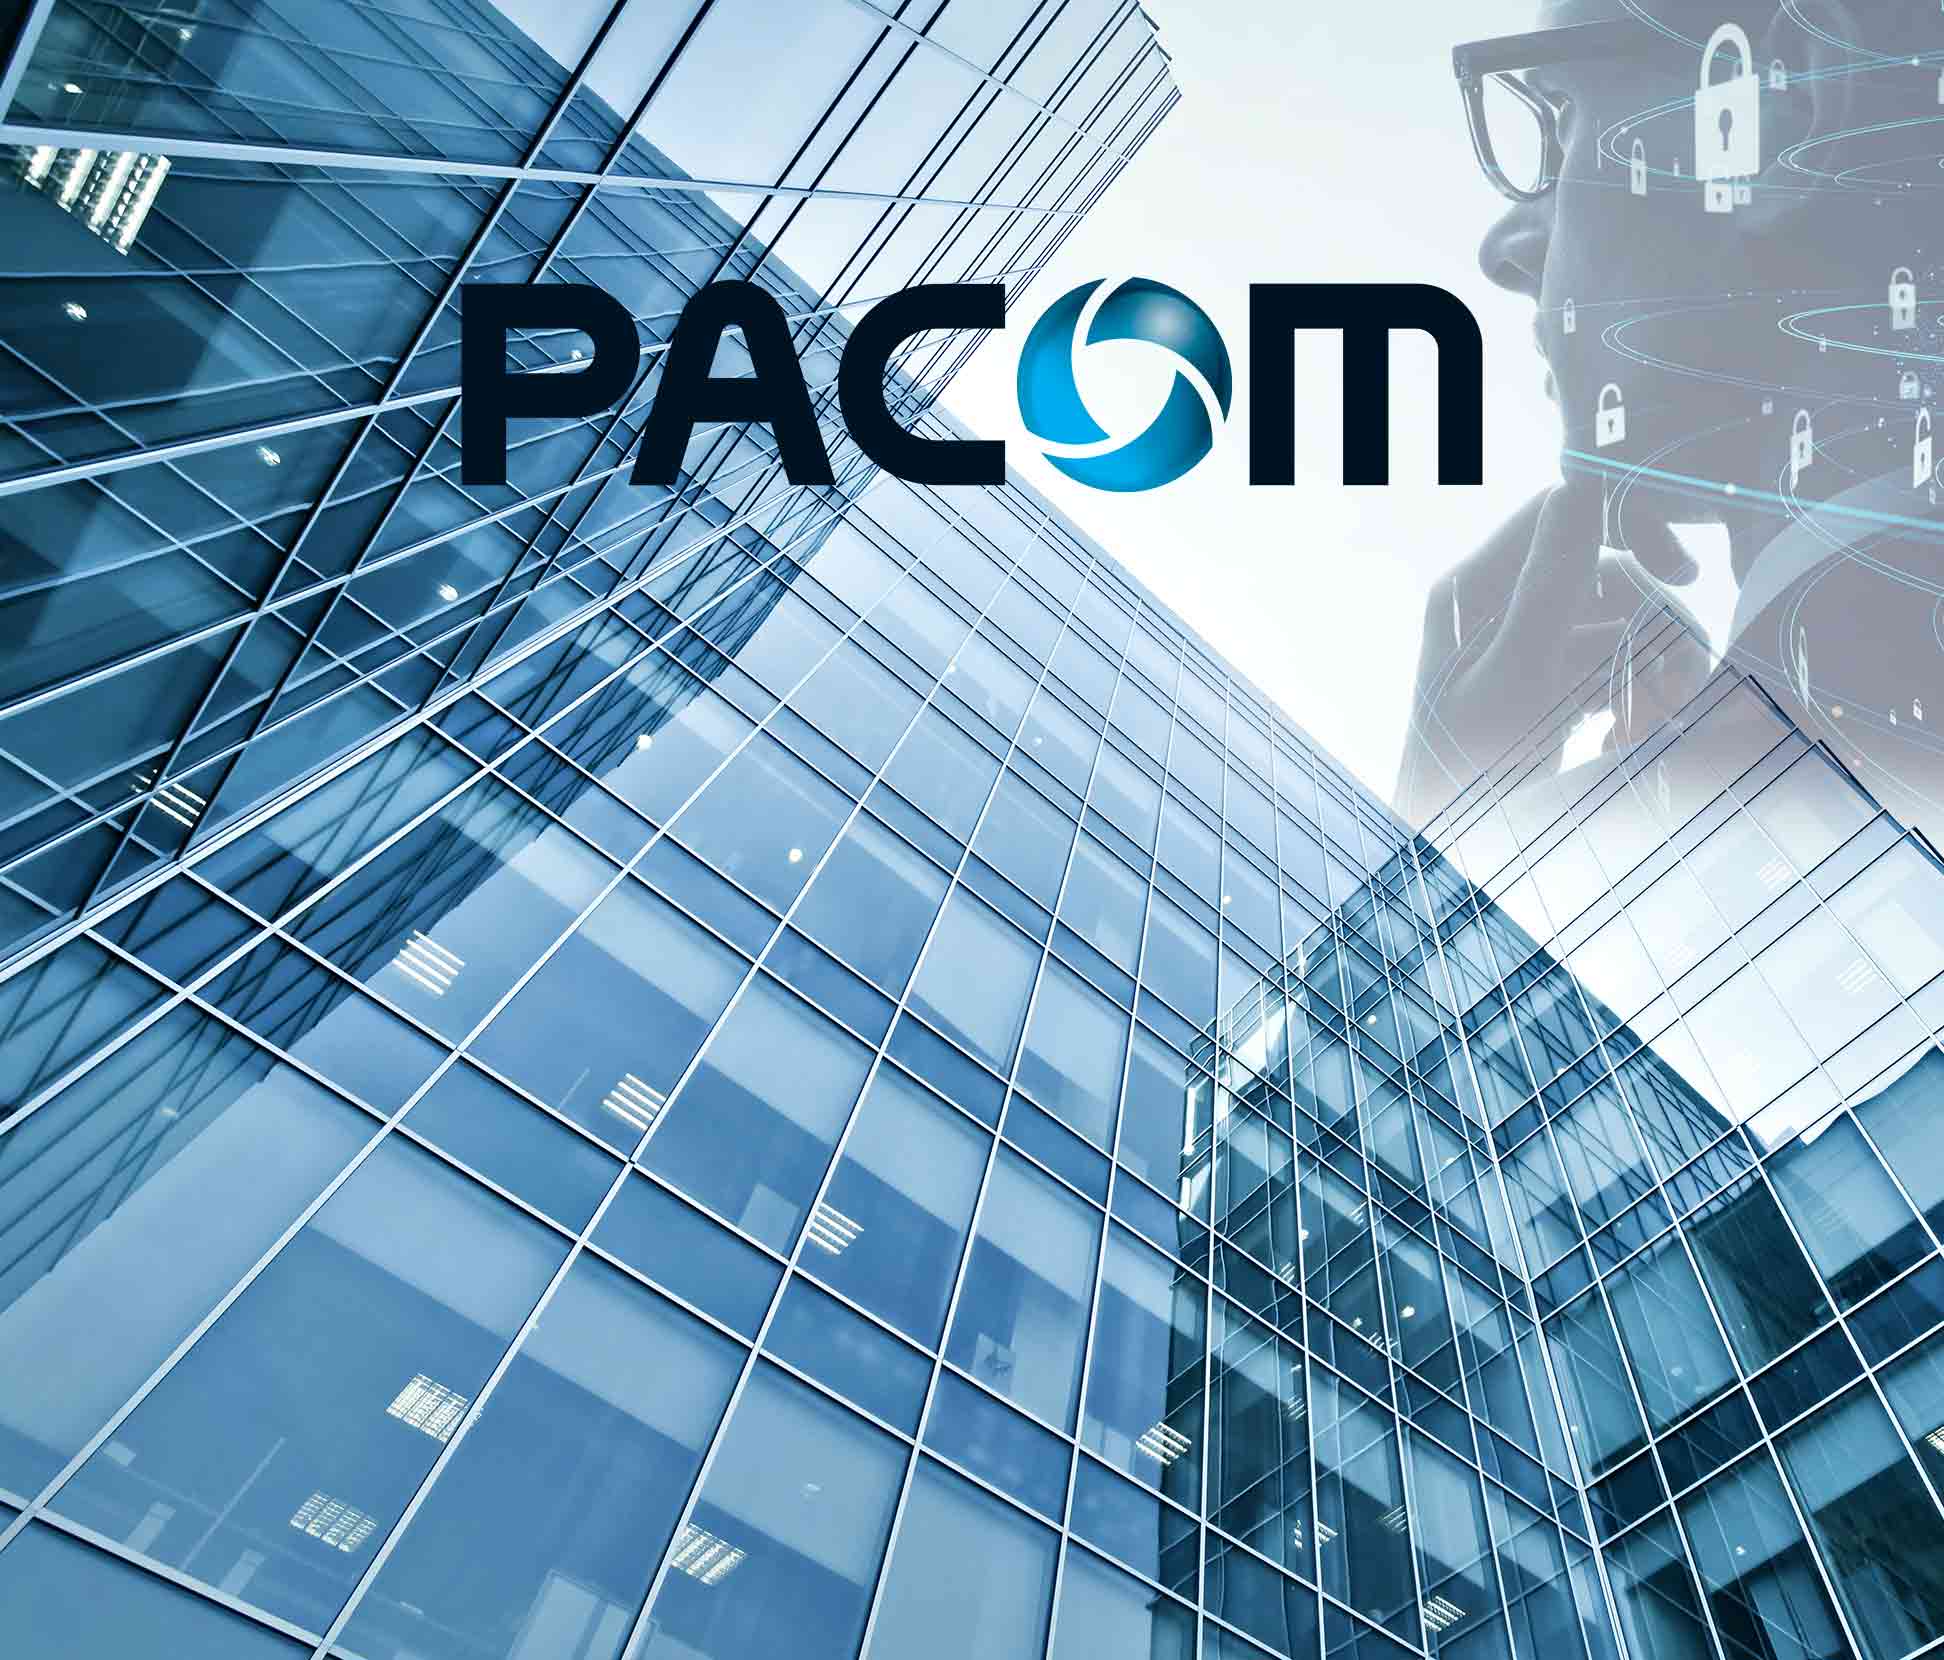 pacom logo with building in the background